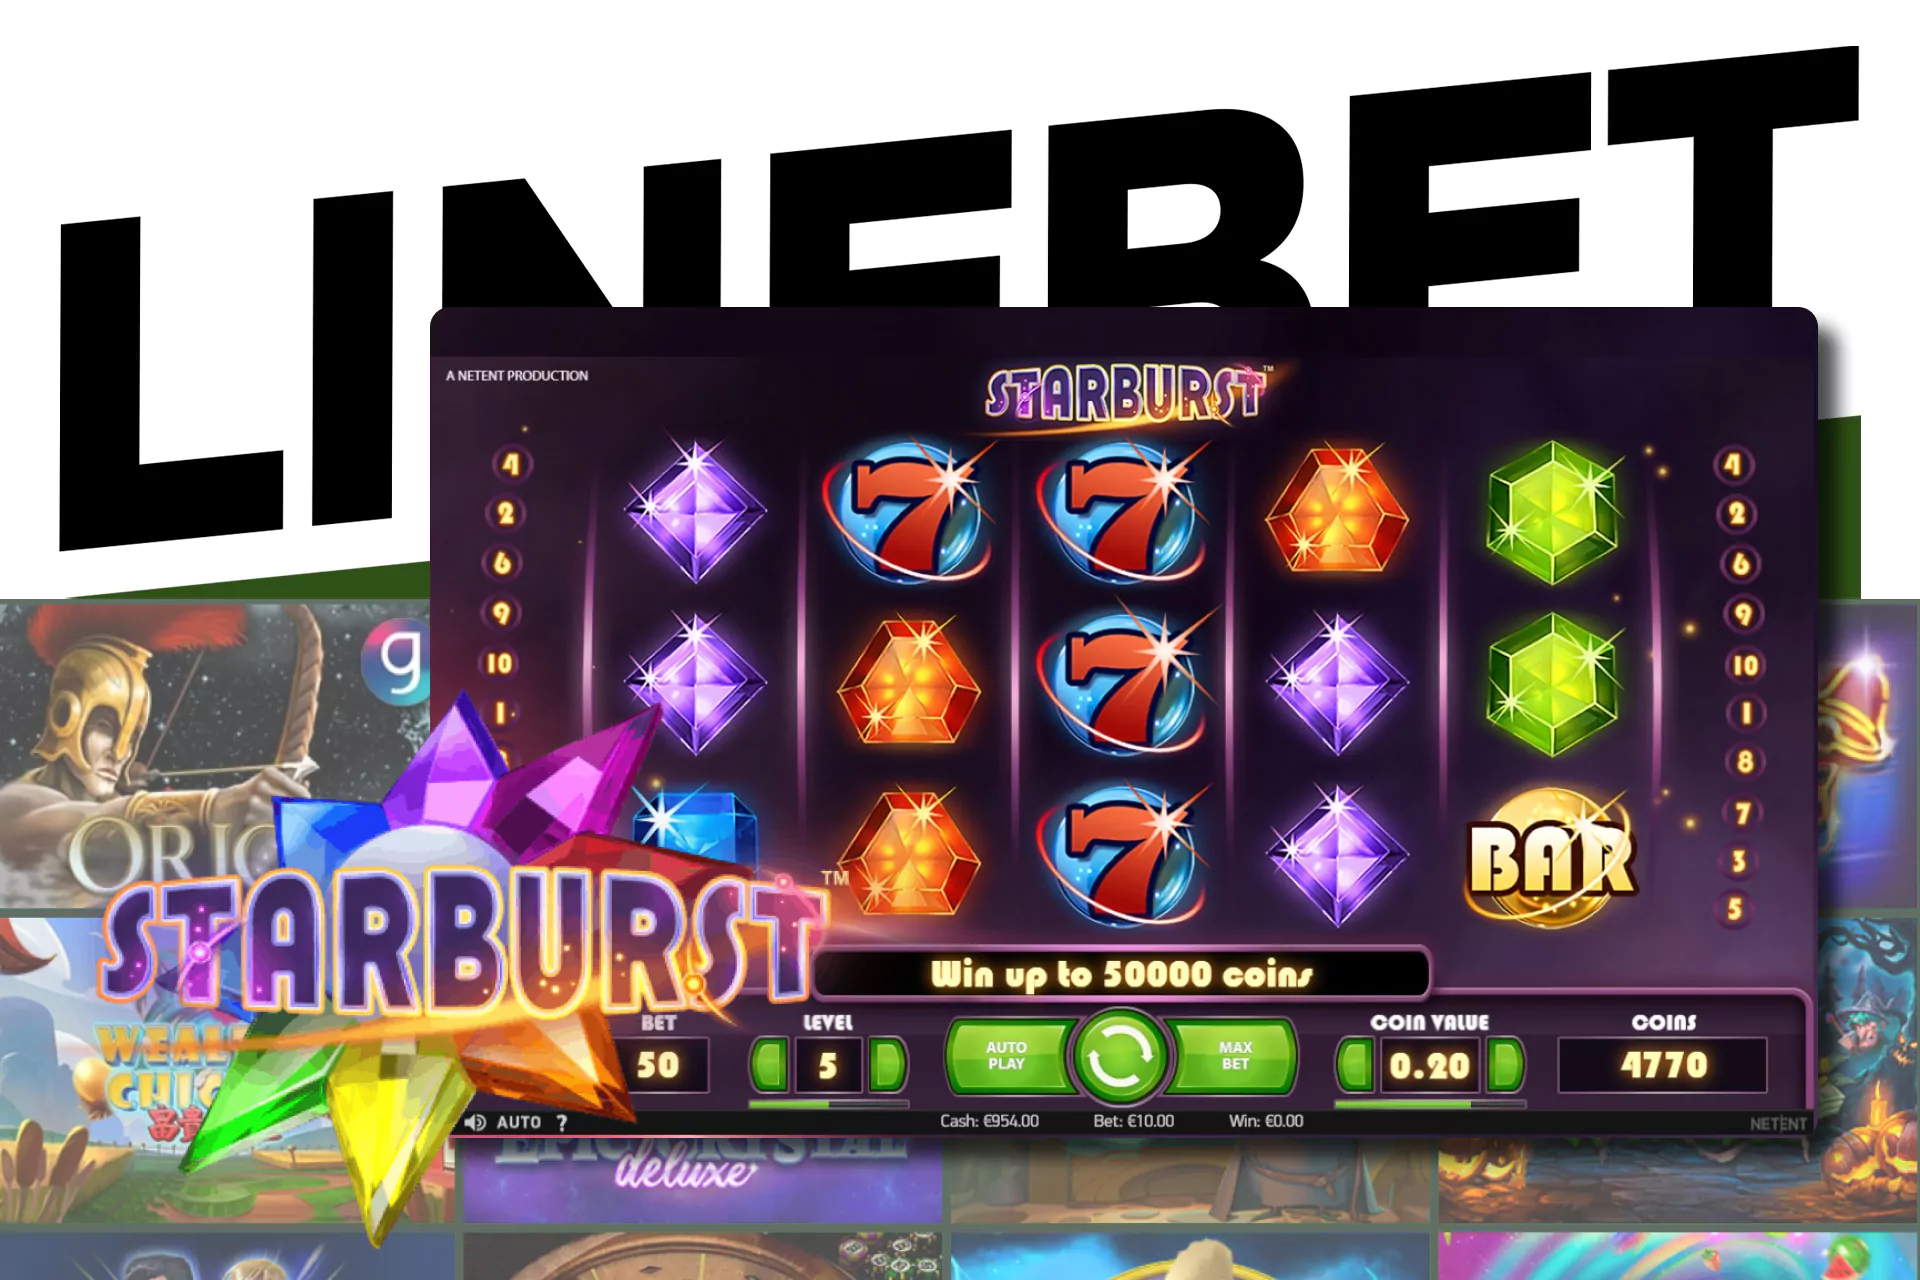 Get three sevens and win at Starburst in Linebet.